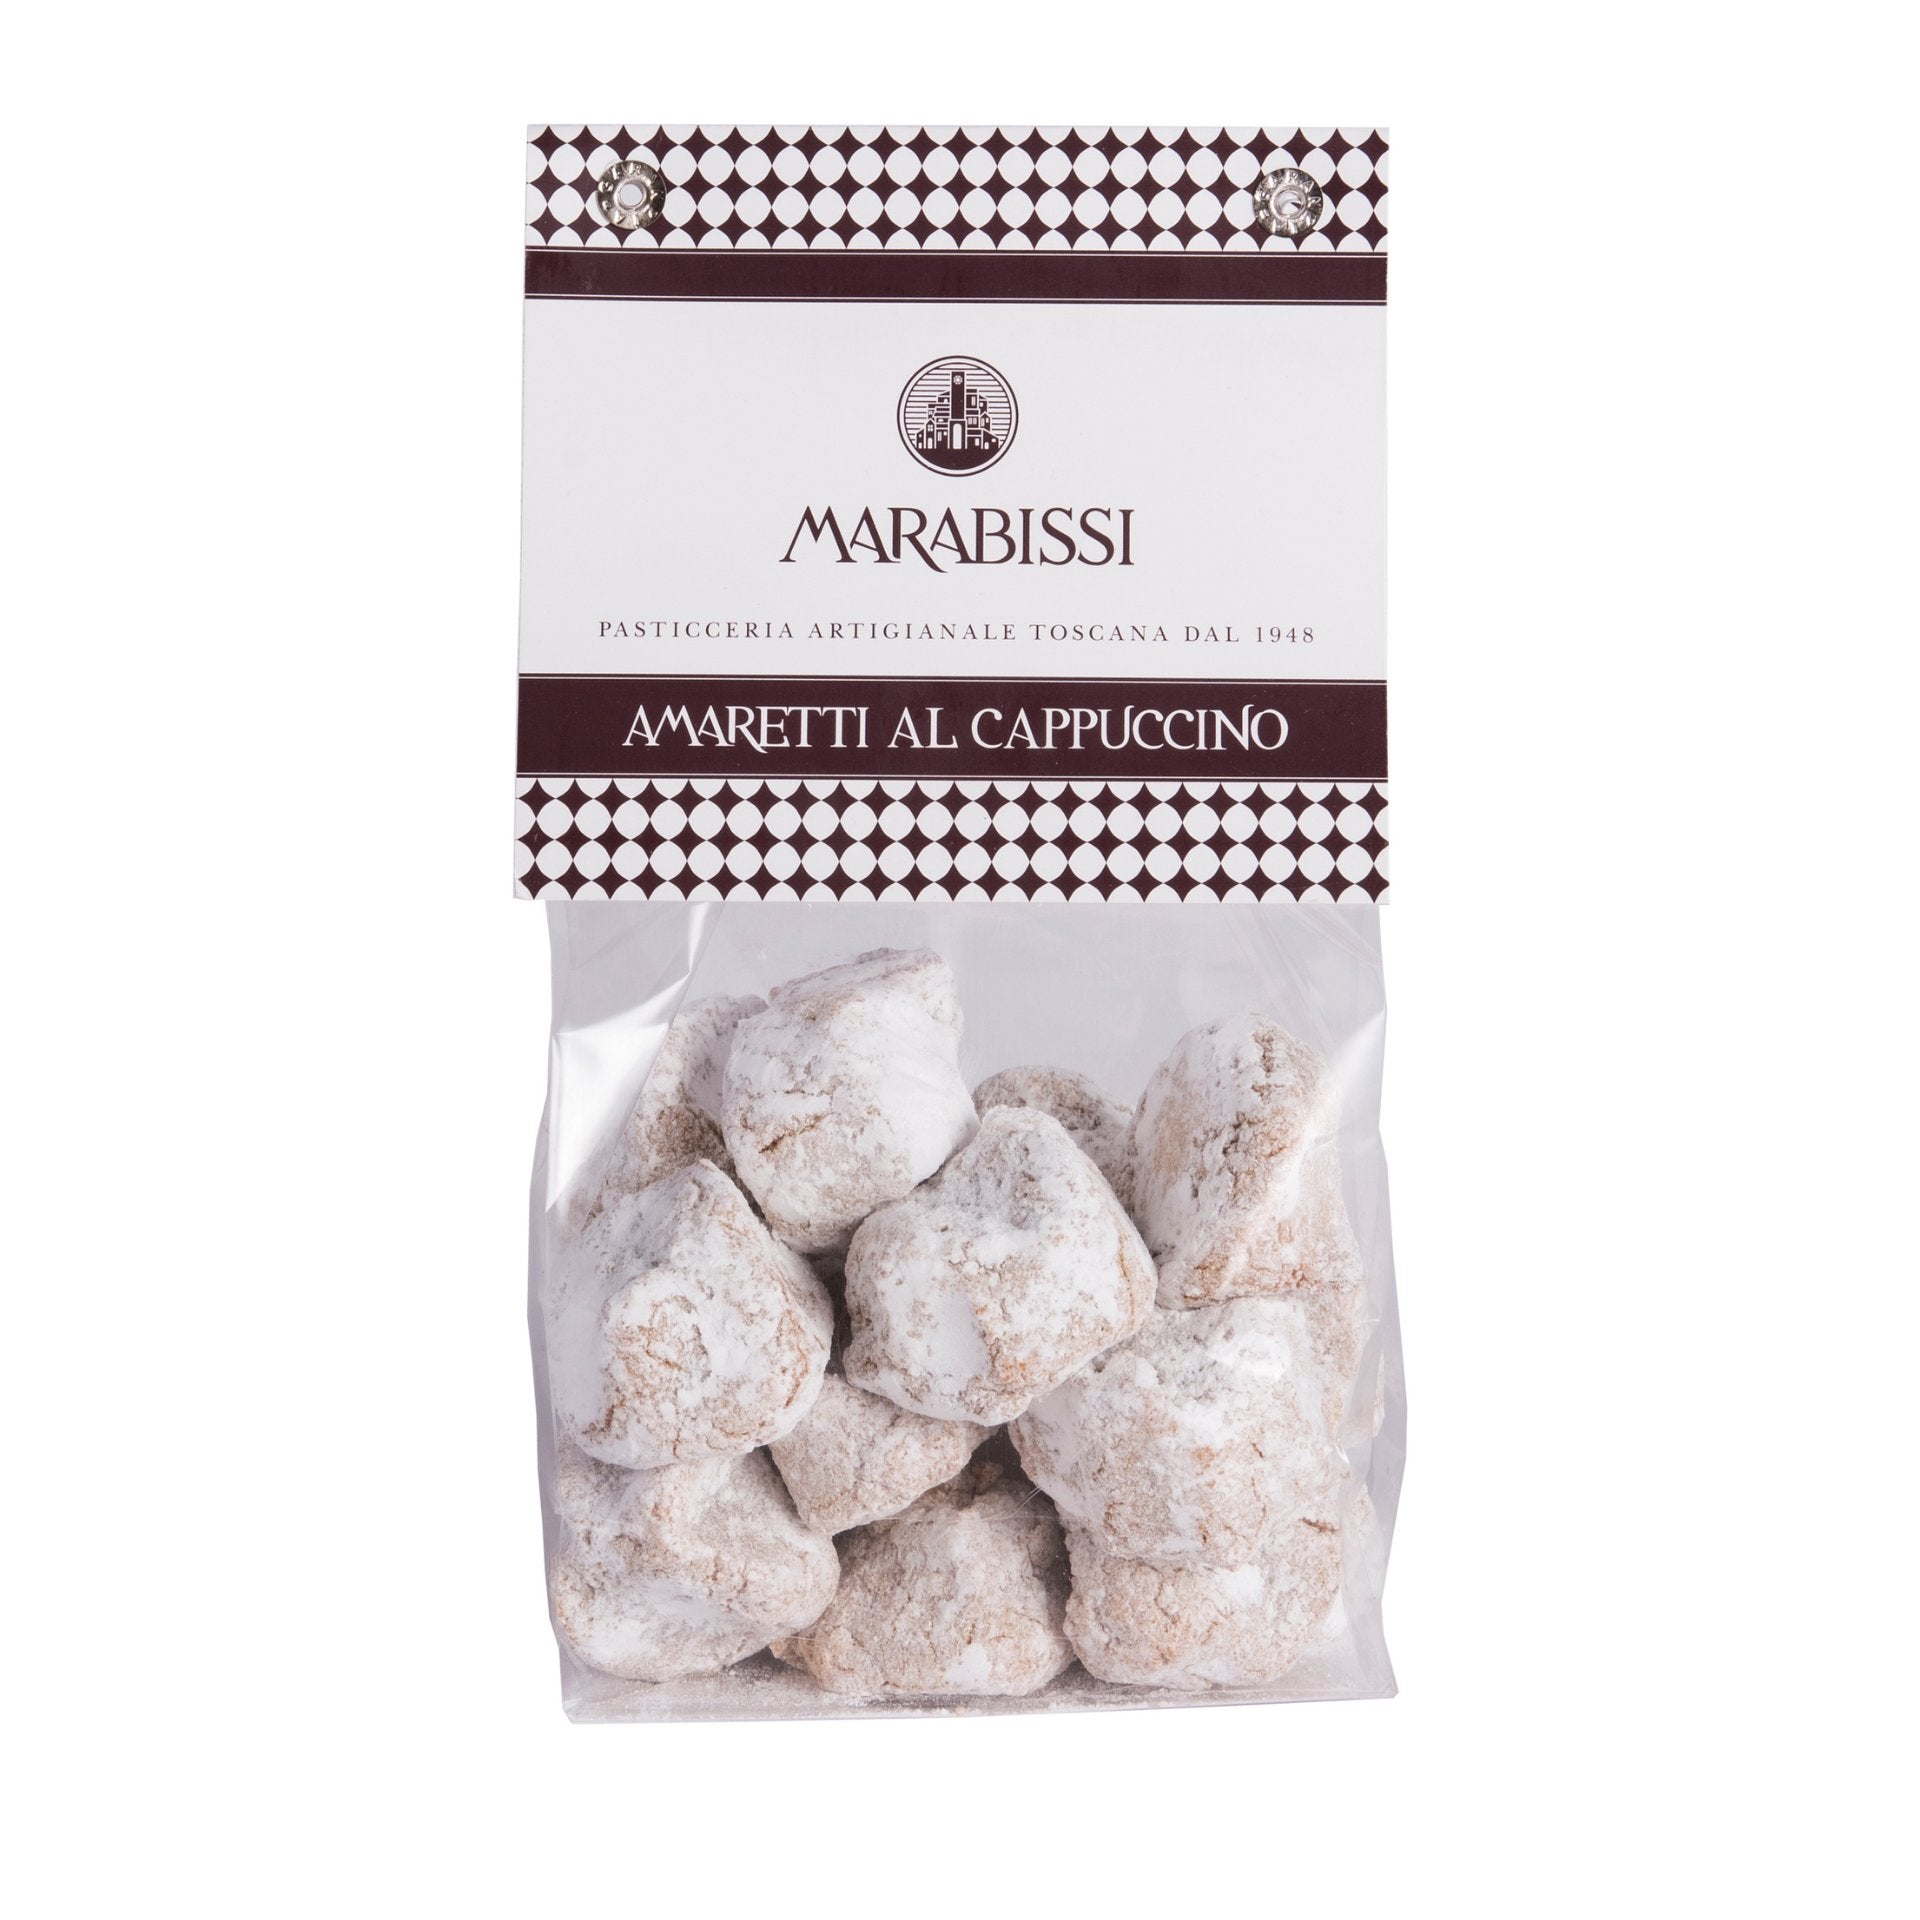 Marabissi Traditional Soft Almond Cappuccino Amaretti from Siena Bag 200g Feast Italy